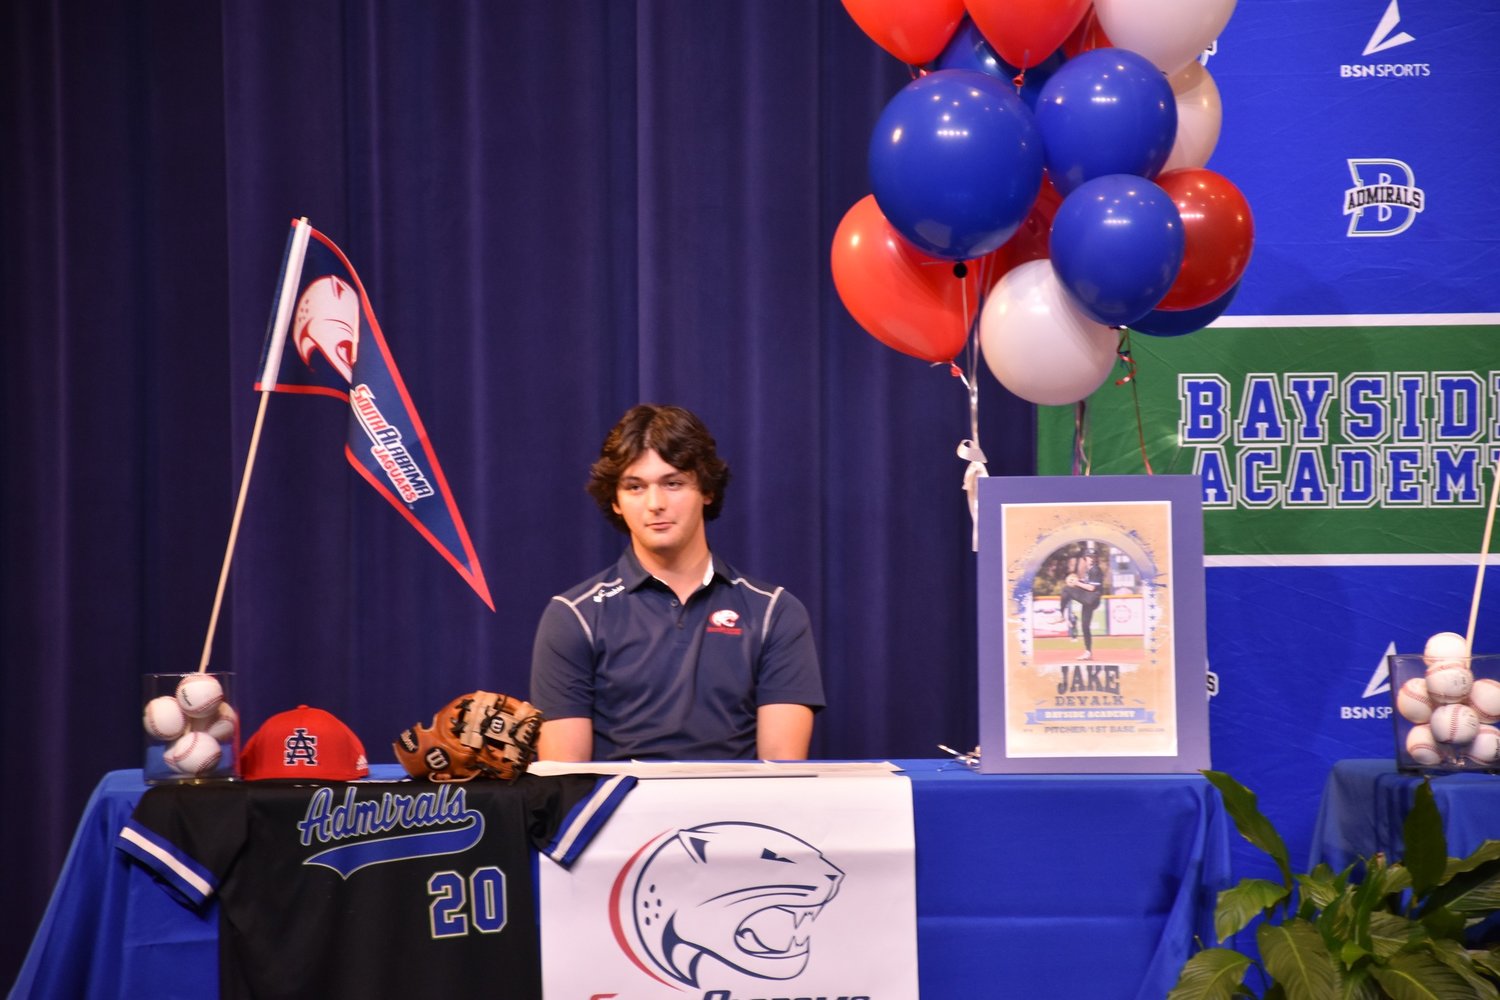 Jake DeValk will stay in state and join the South Alabama Jaguars after his final season with Bayside Academy. The Admiral senior signed his National Letter of Intent Wednesday, Nov. 9, at the high school.